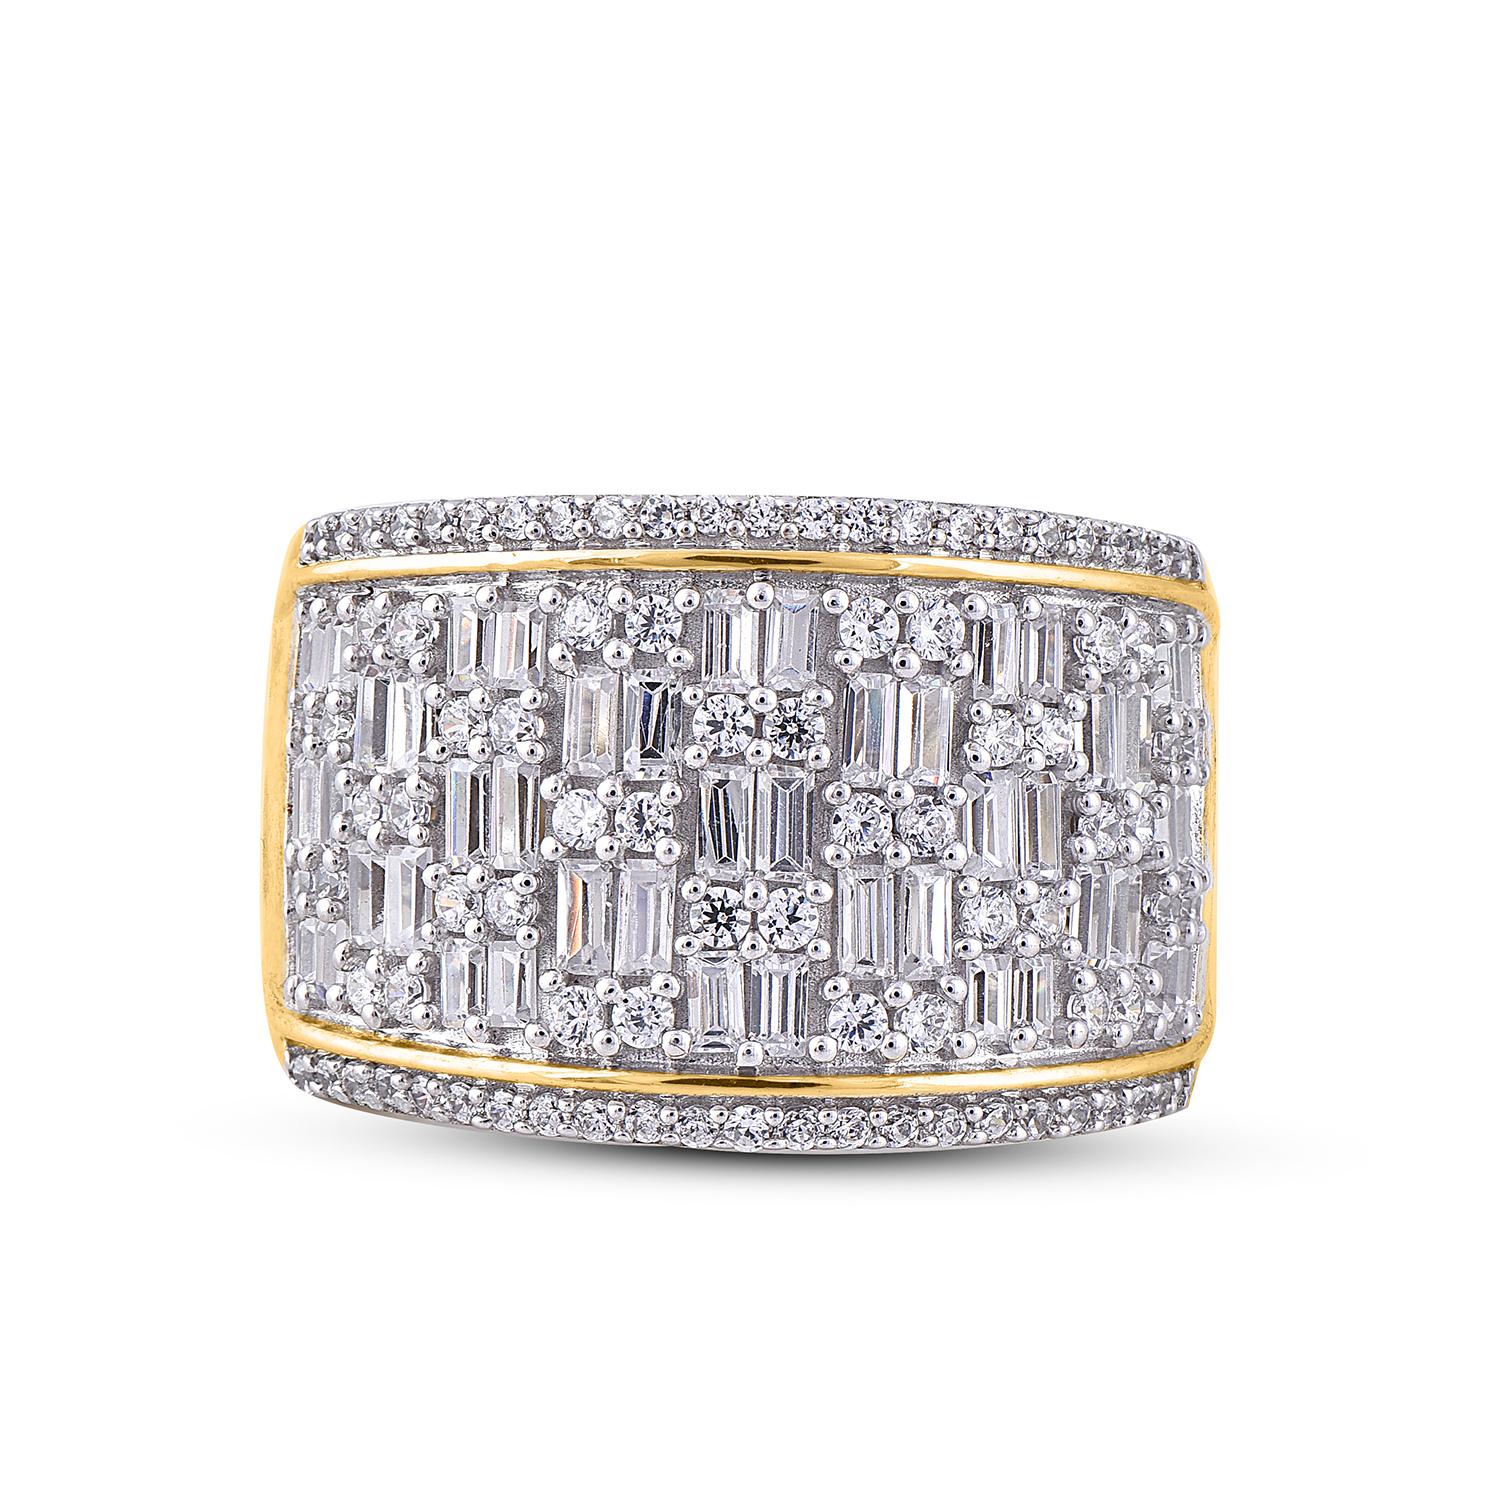 Truly exquisite, this diamond engagement band is sure to be admired for the inherent classic beauty and elegance within its design. The total weight of diamonds 1.50 carat, H-I color, I2 Clarity. This ring is beautifully crafted in 14K yellow gold